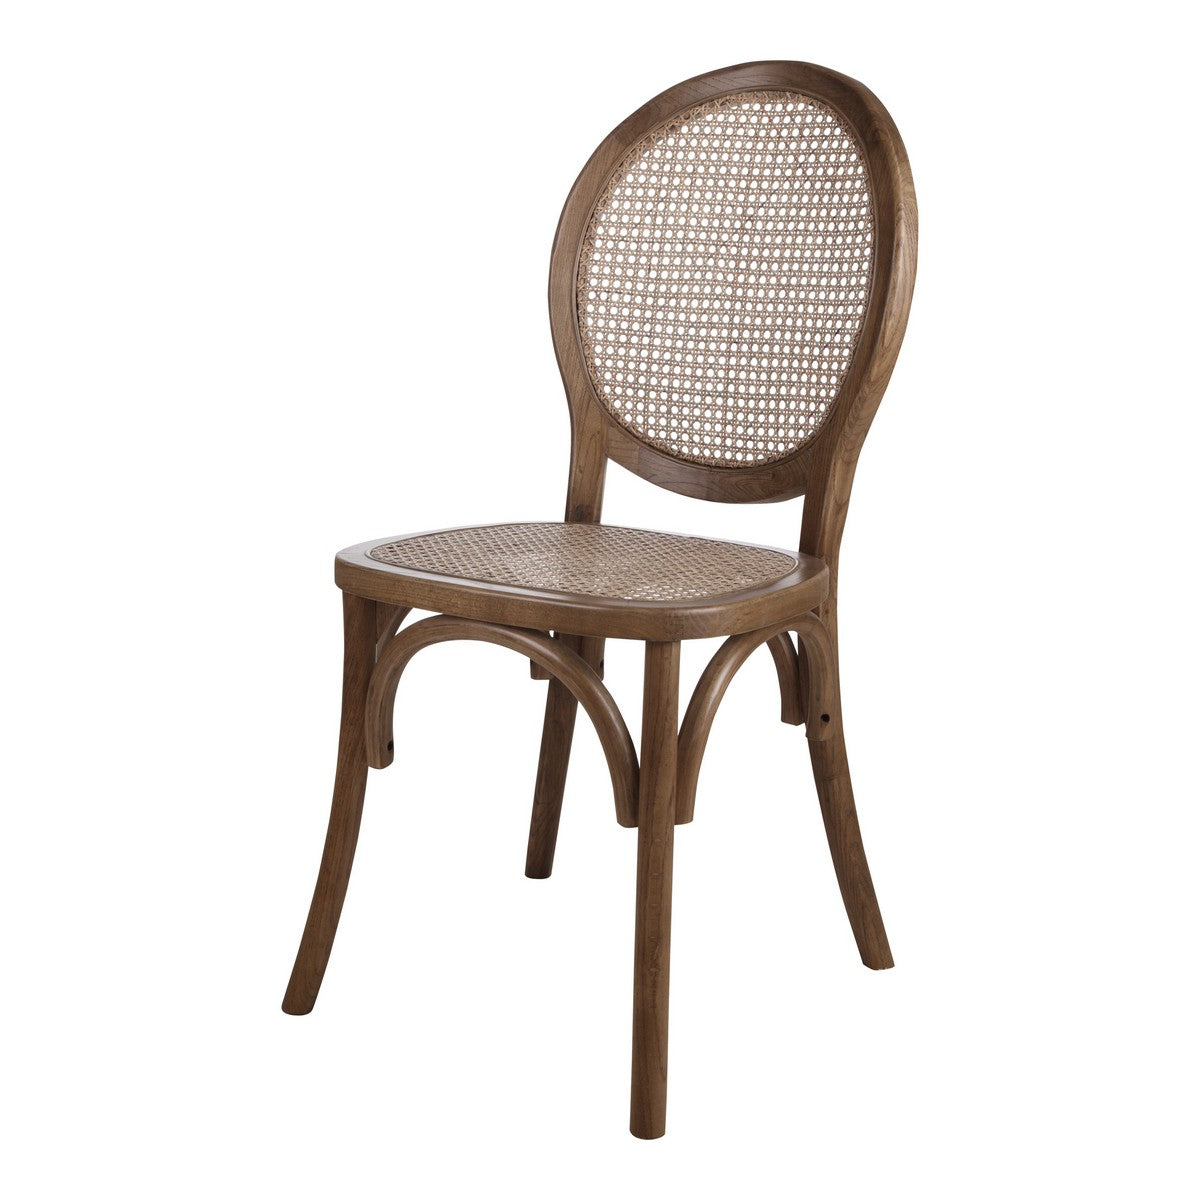 Moe's Home Collection Rivalto Dining Chair-Set of Two - FG-1016-03